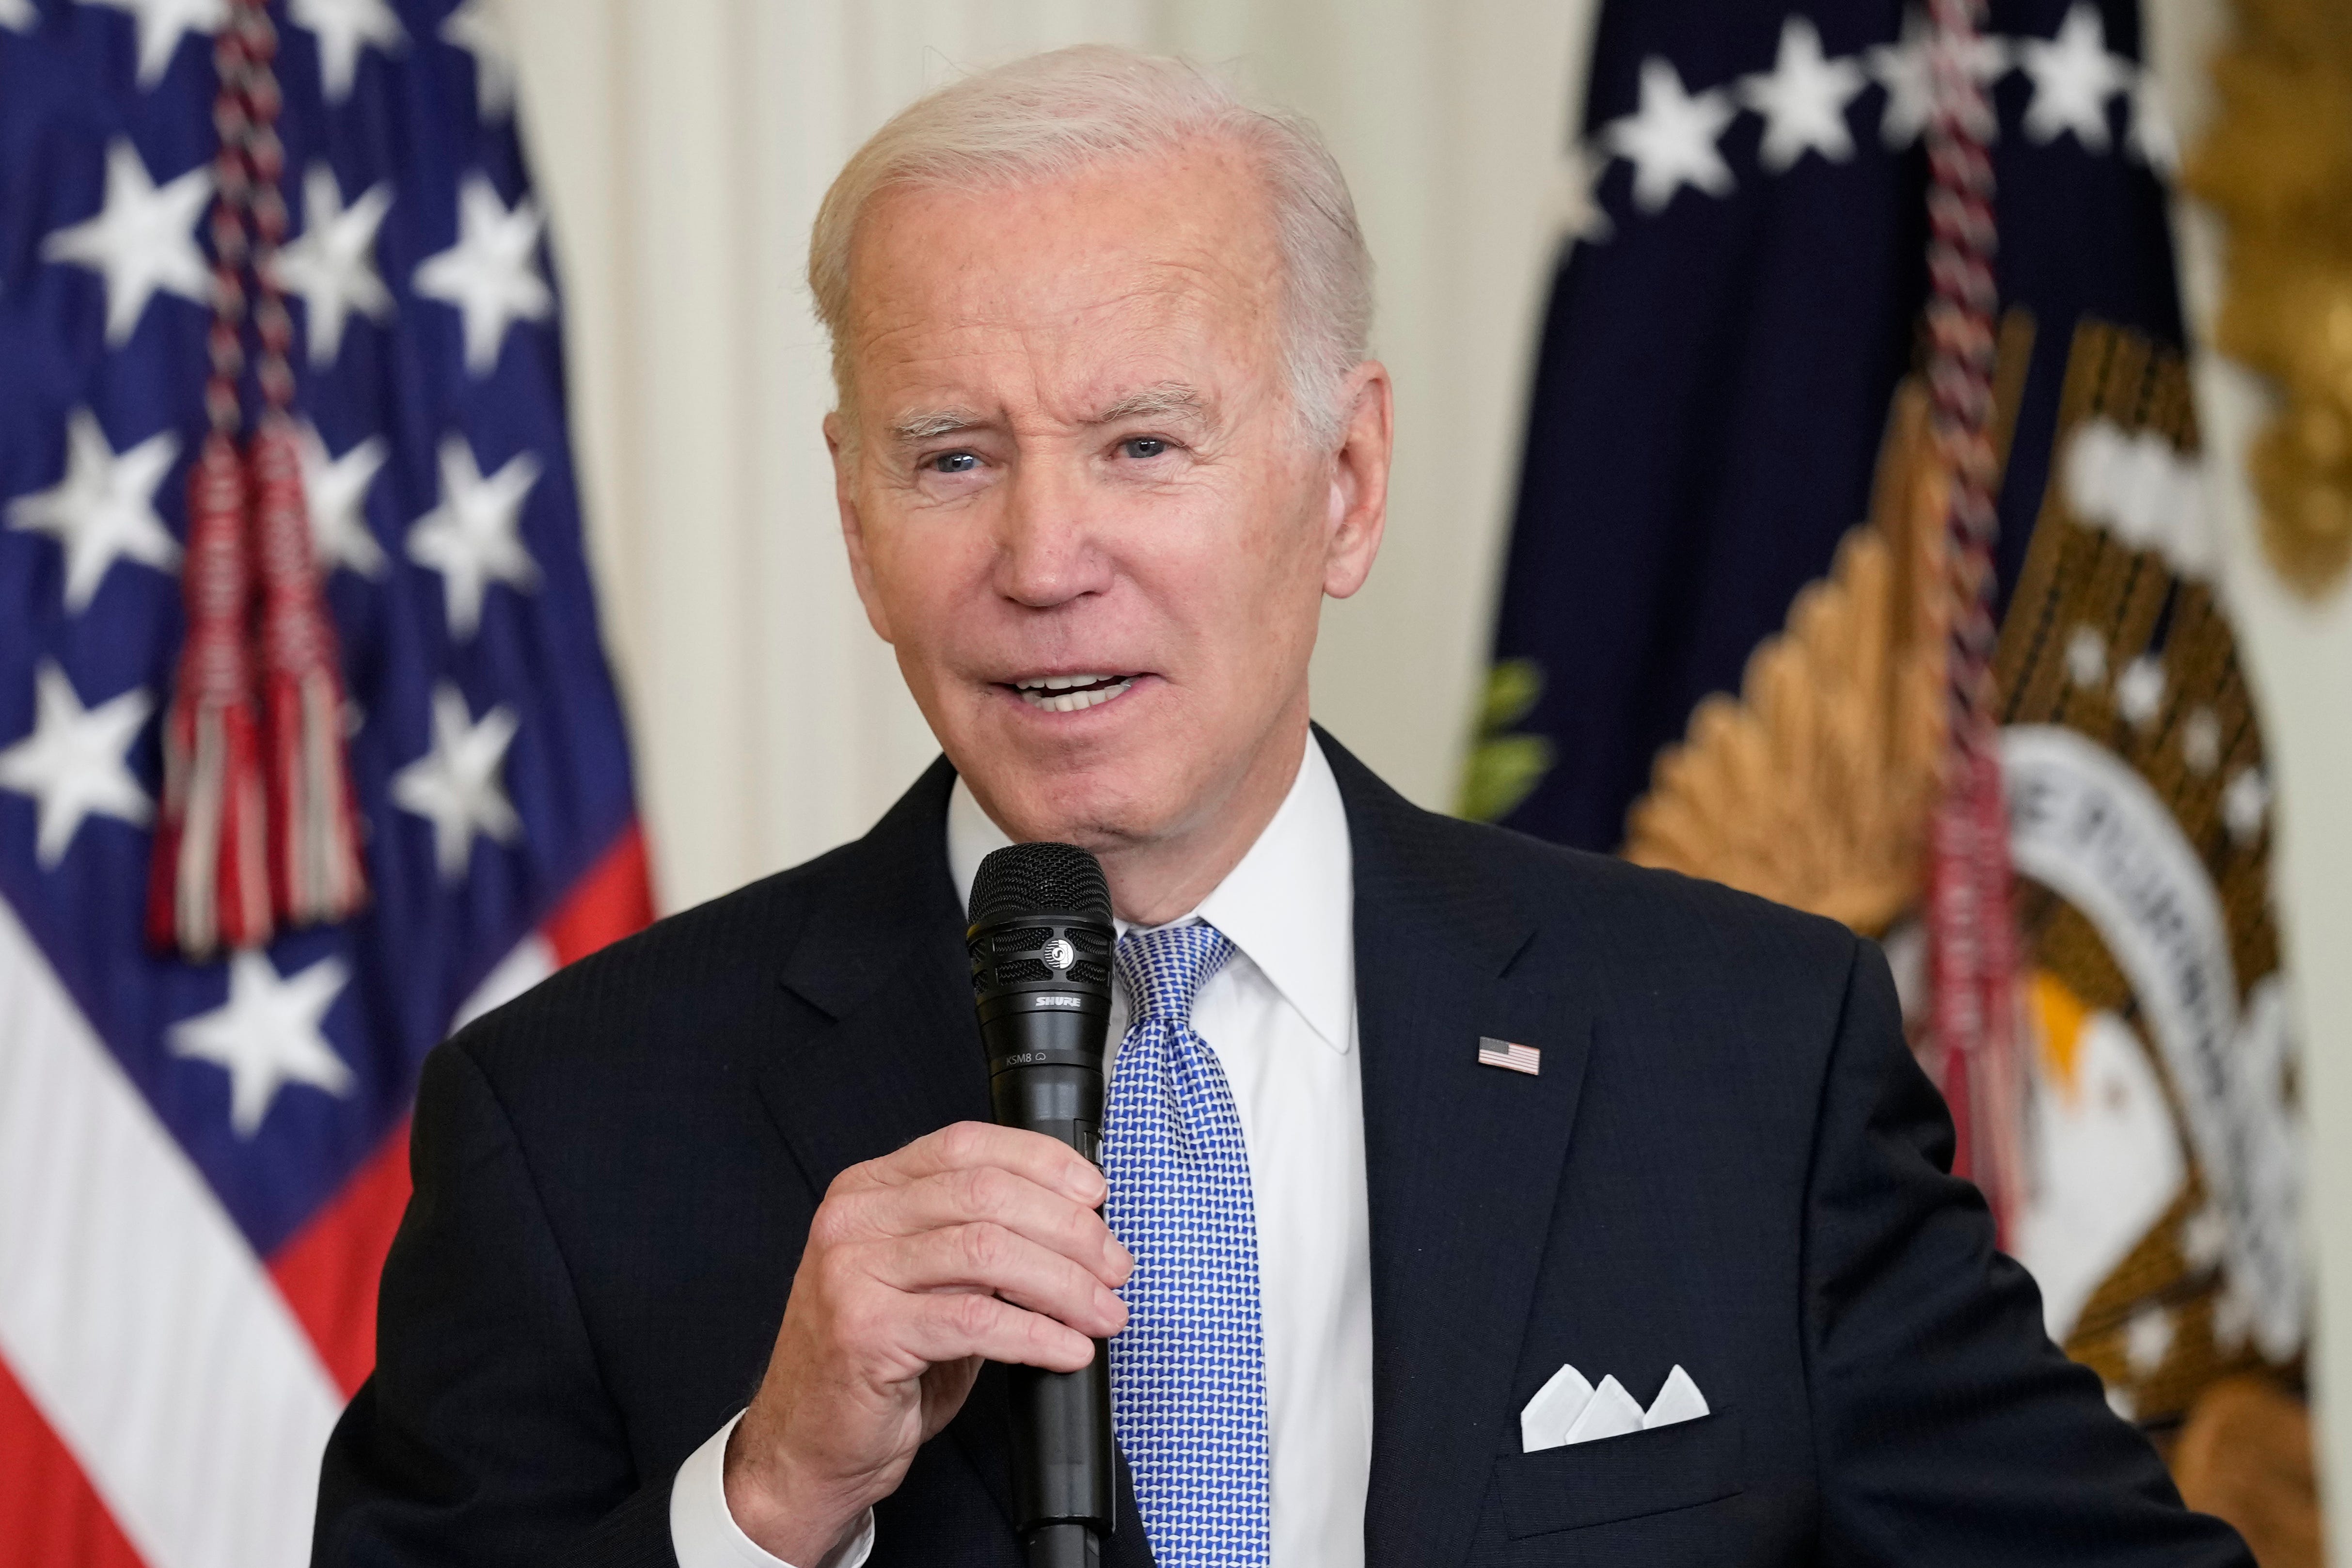 FBI searched Biden's former DC office after first classified document discovery